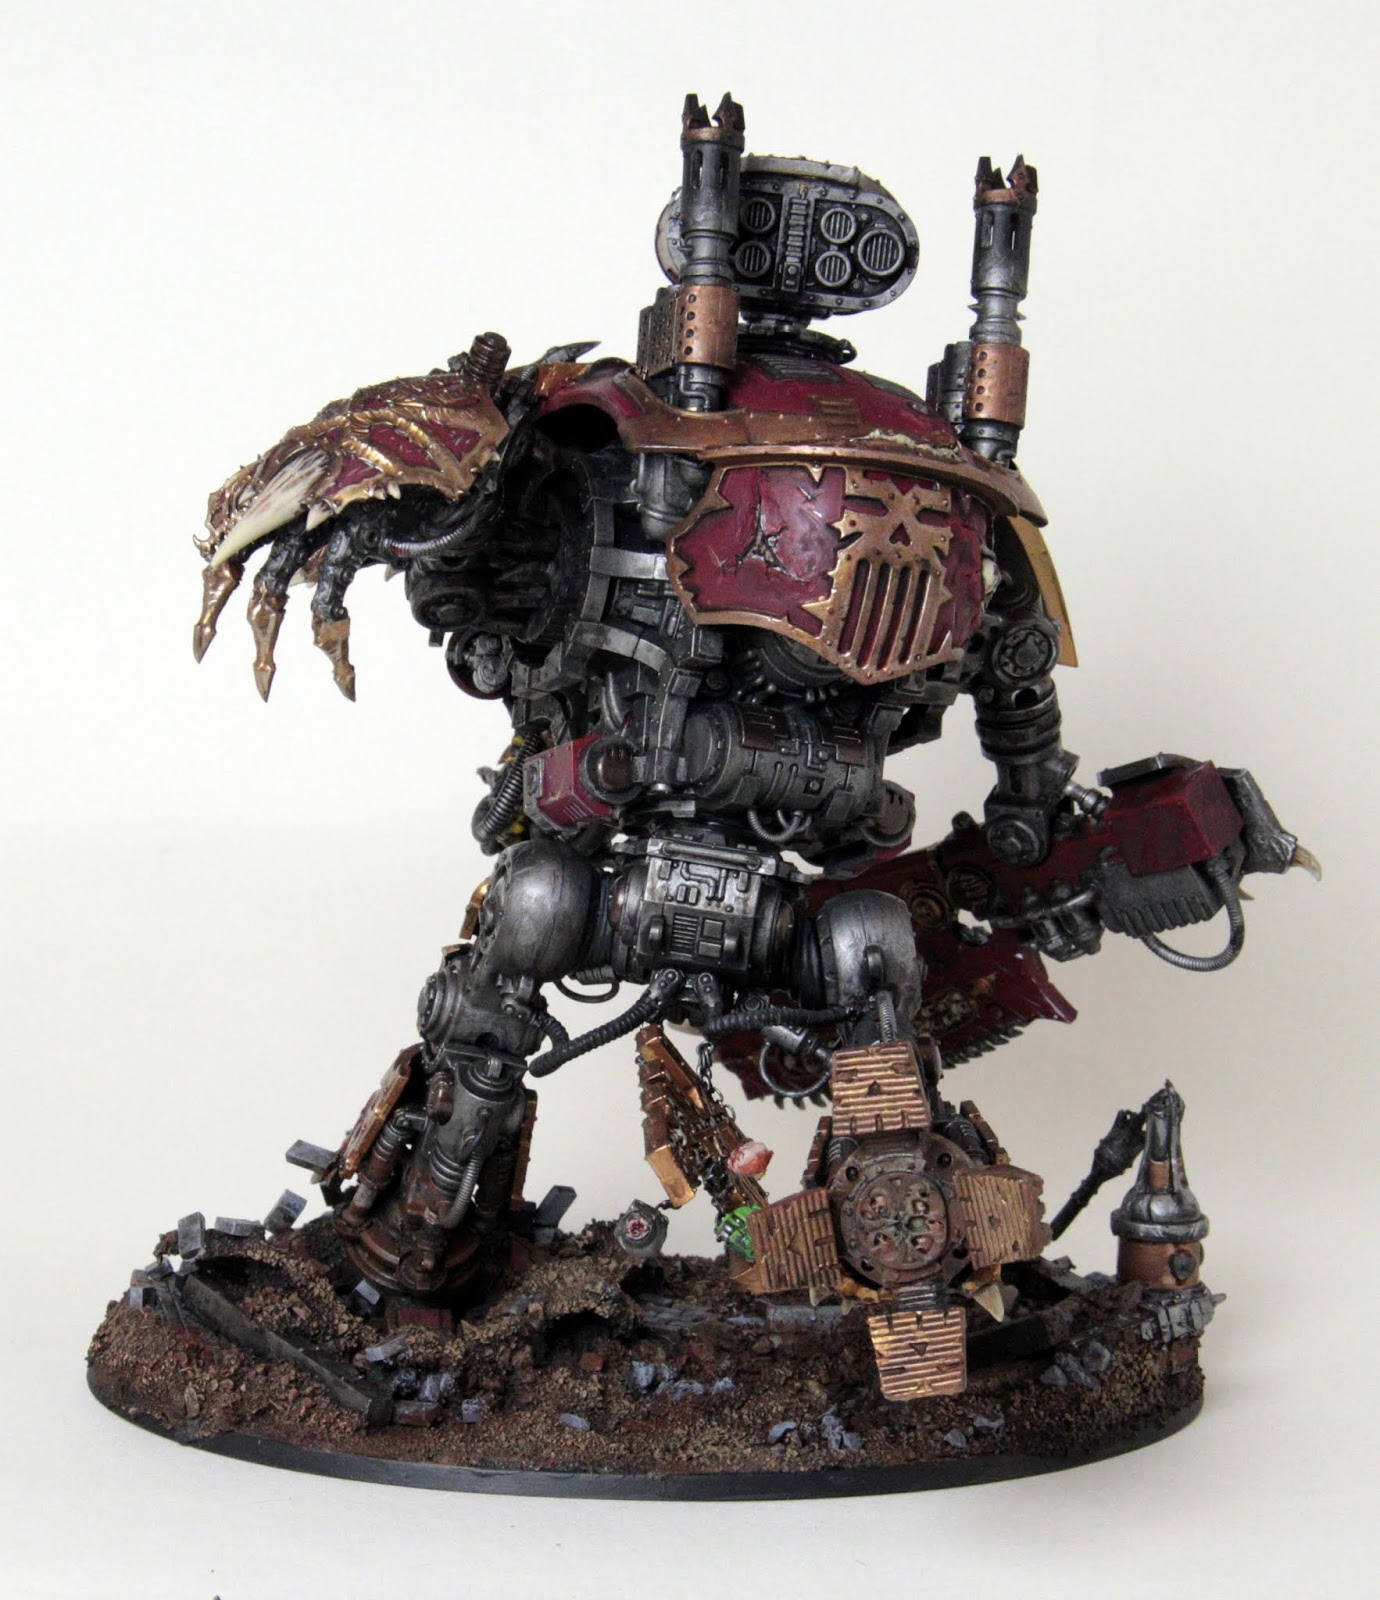 What's On Your Table: Converted Khornate Knight - Faeit 212